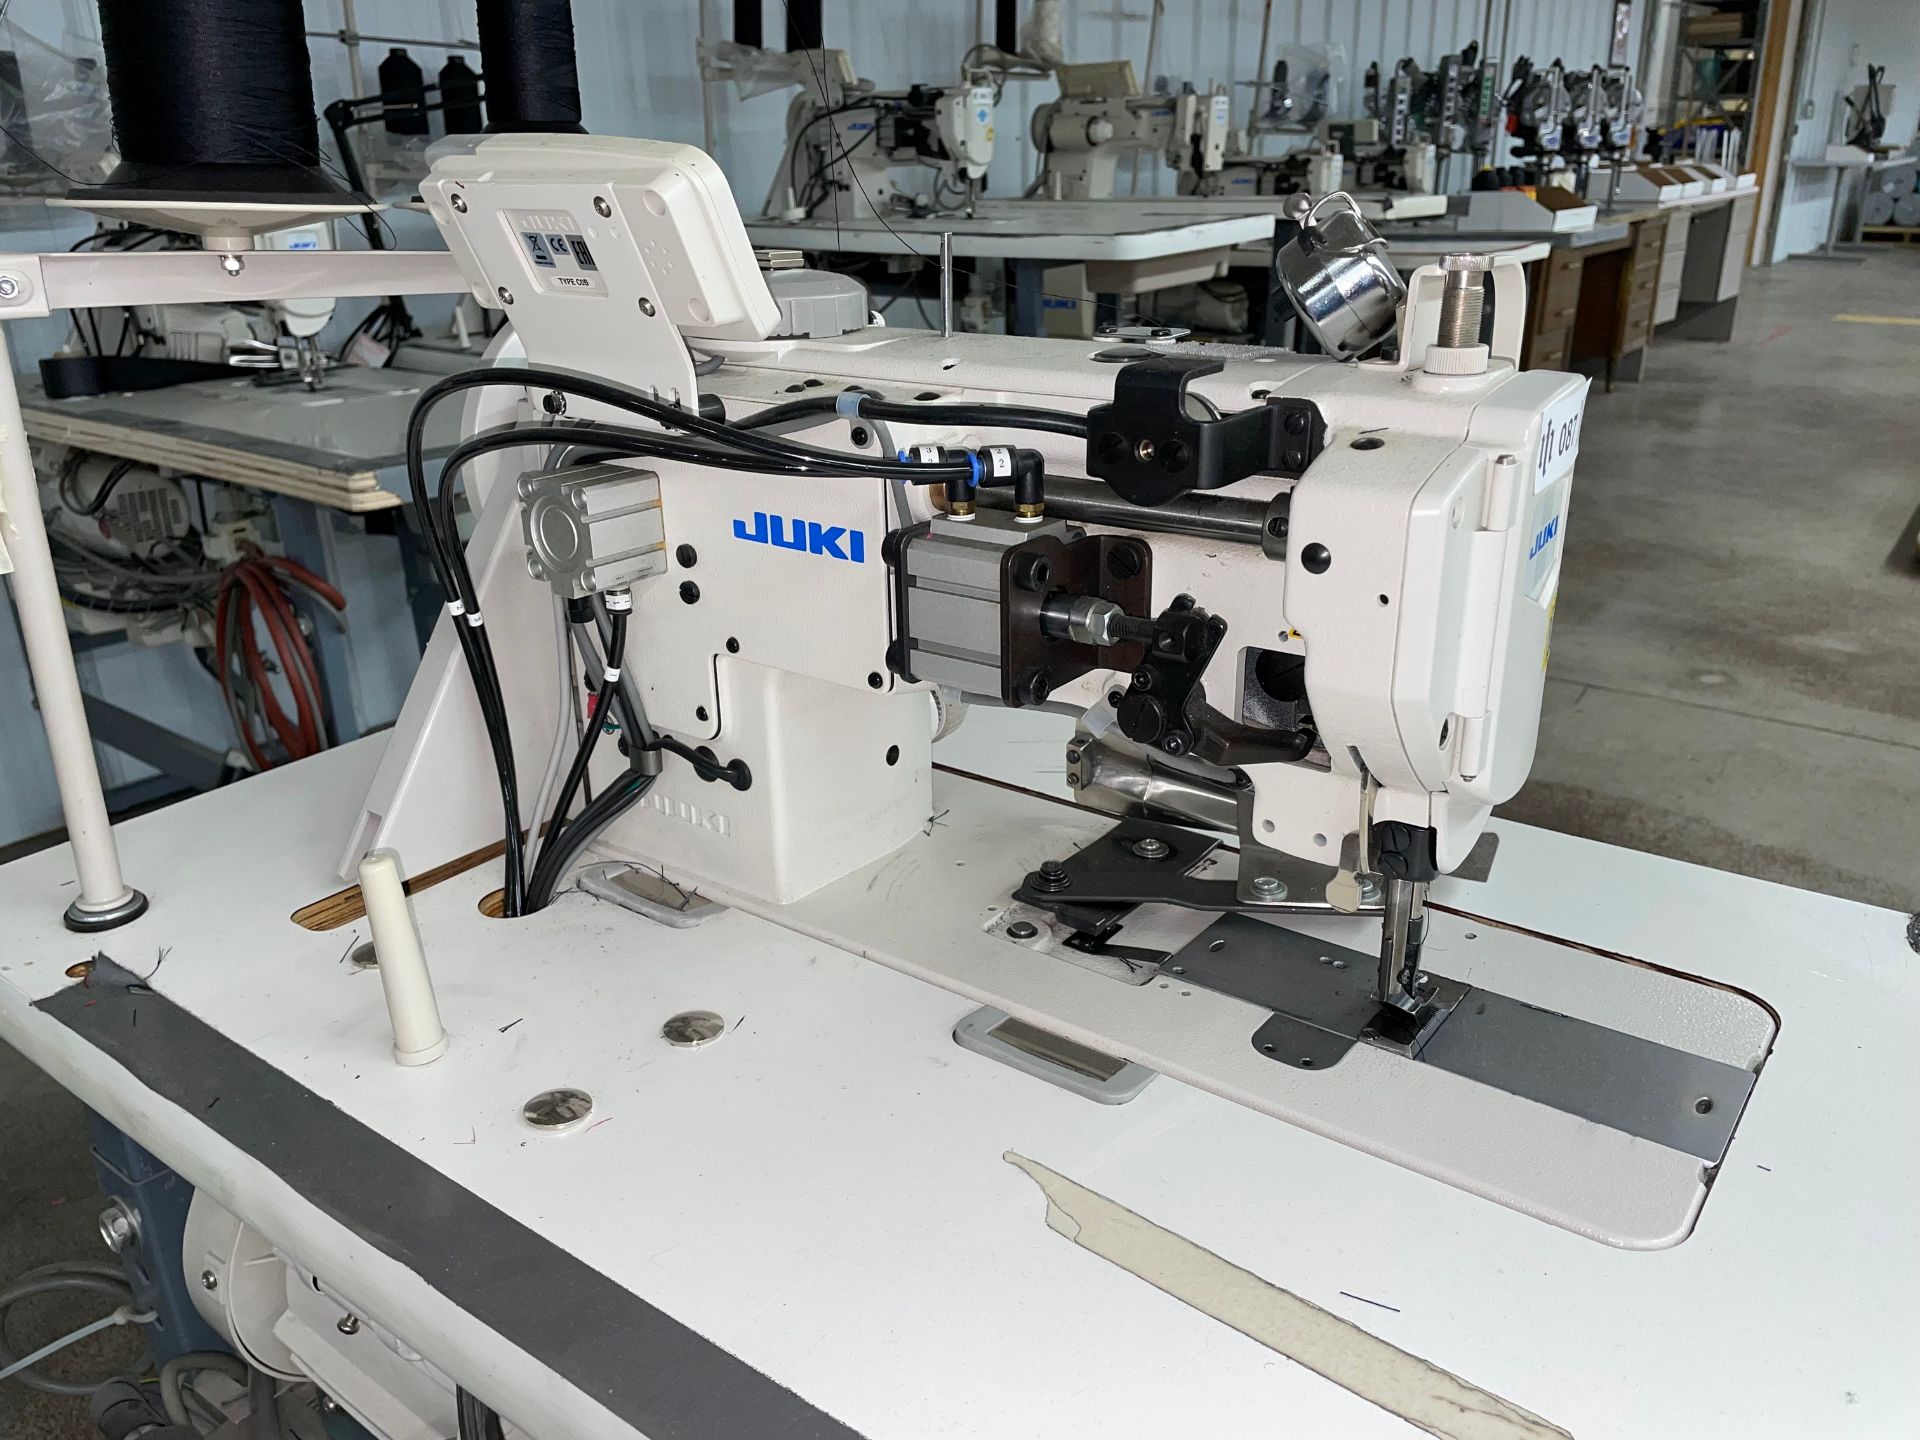 Juki Industrial Sewing Machine with Table - Image 3 of 10